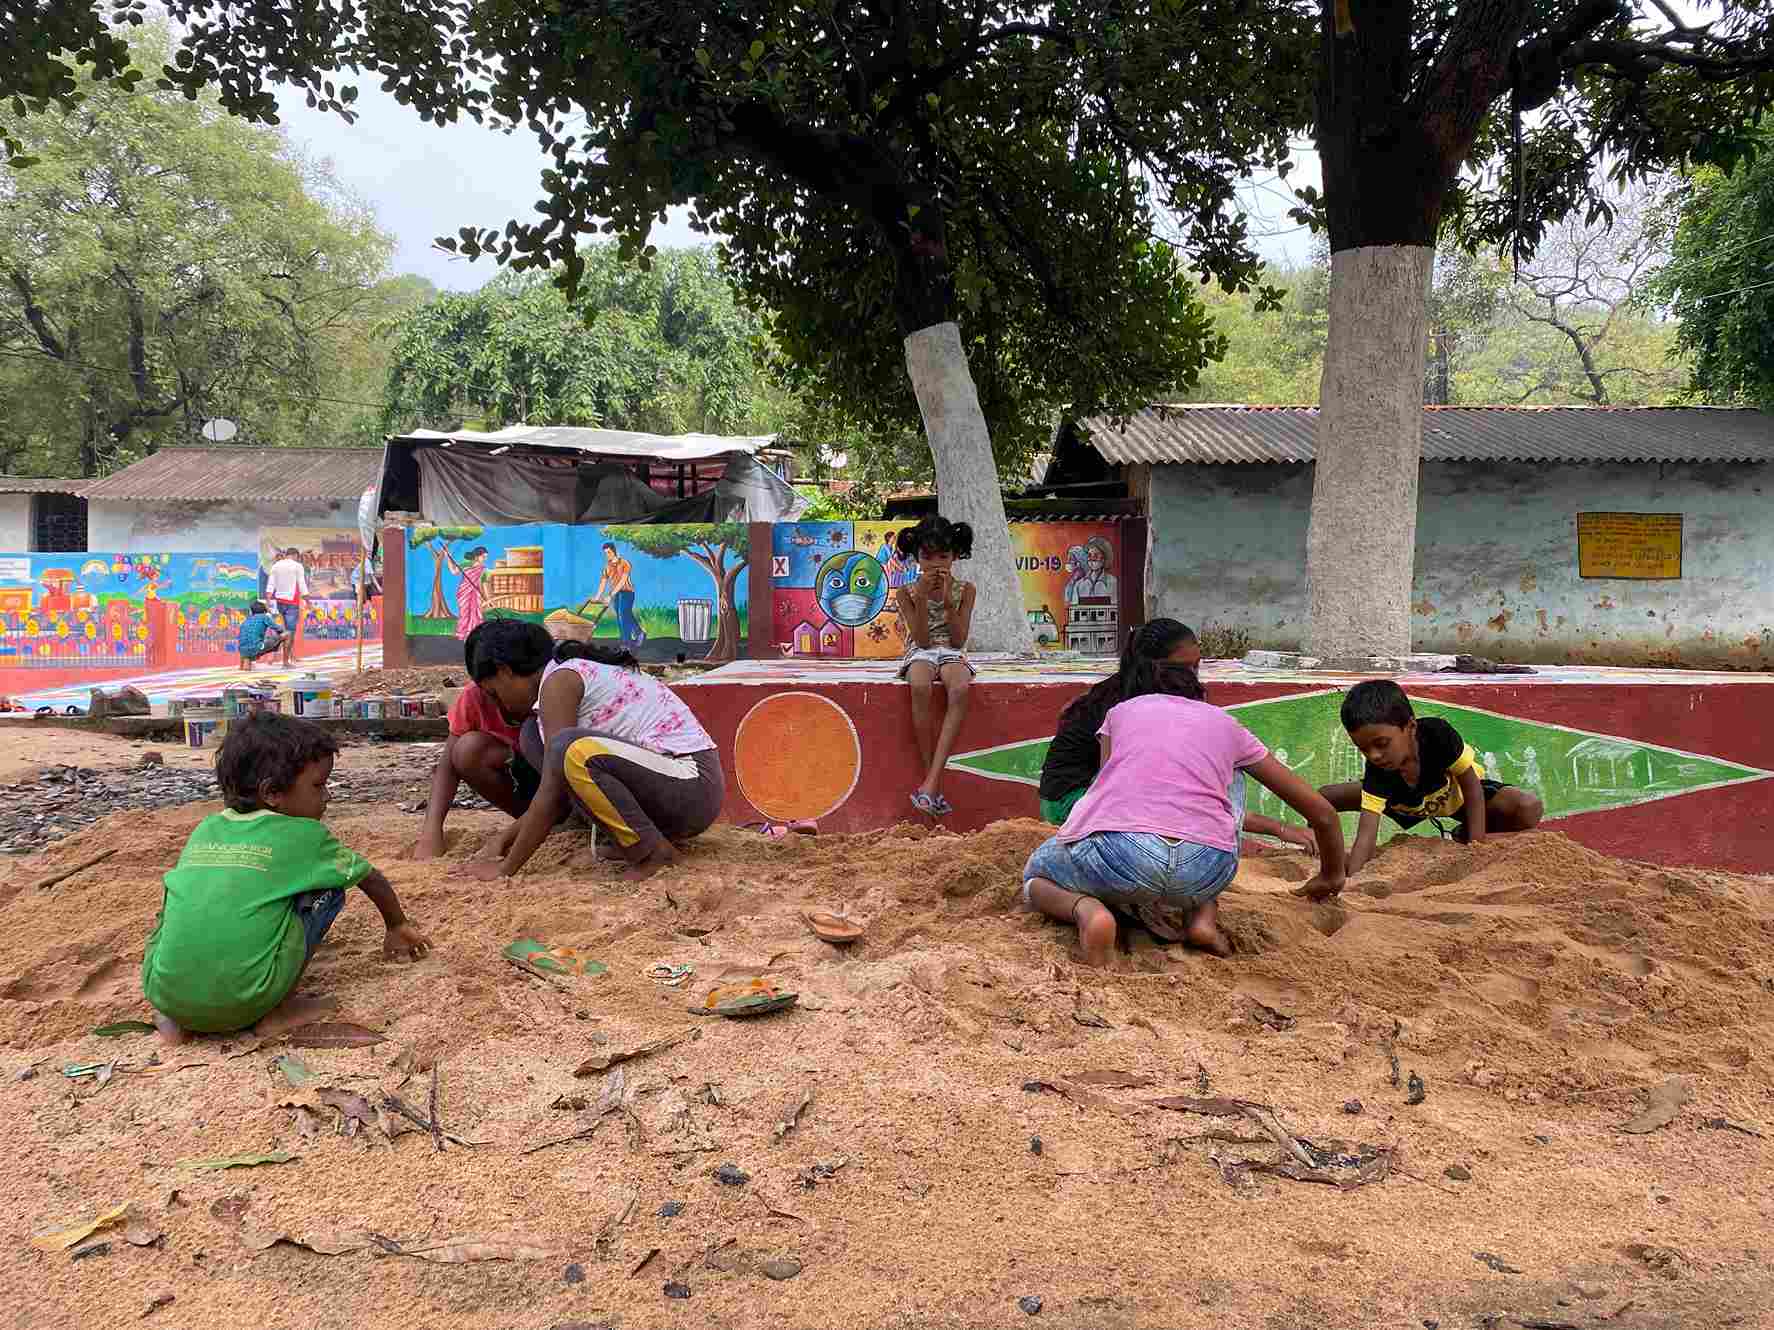 Children playing in the sandpit near the temple in Leprosy Pada.